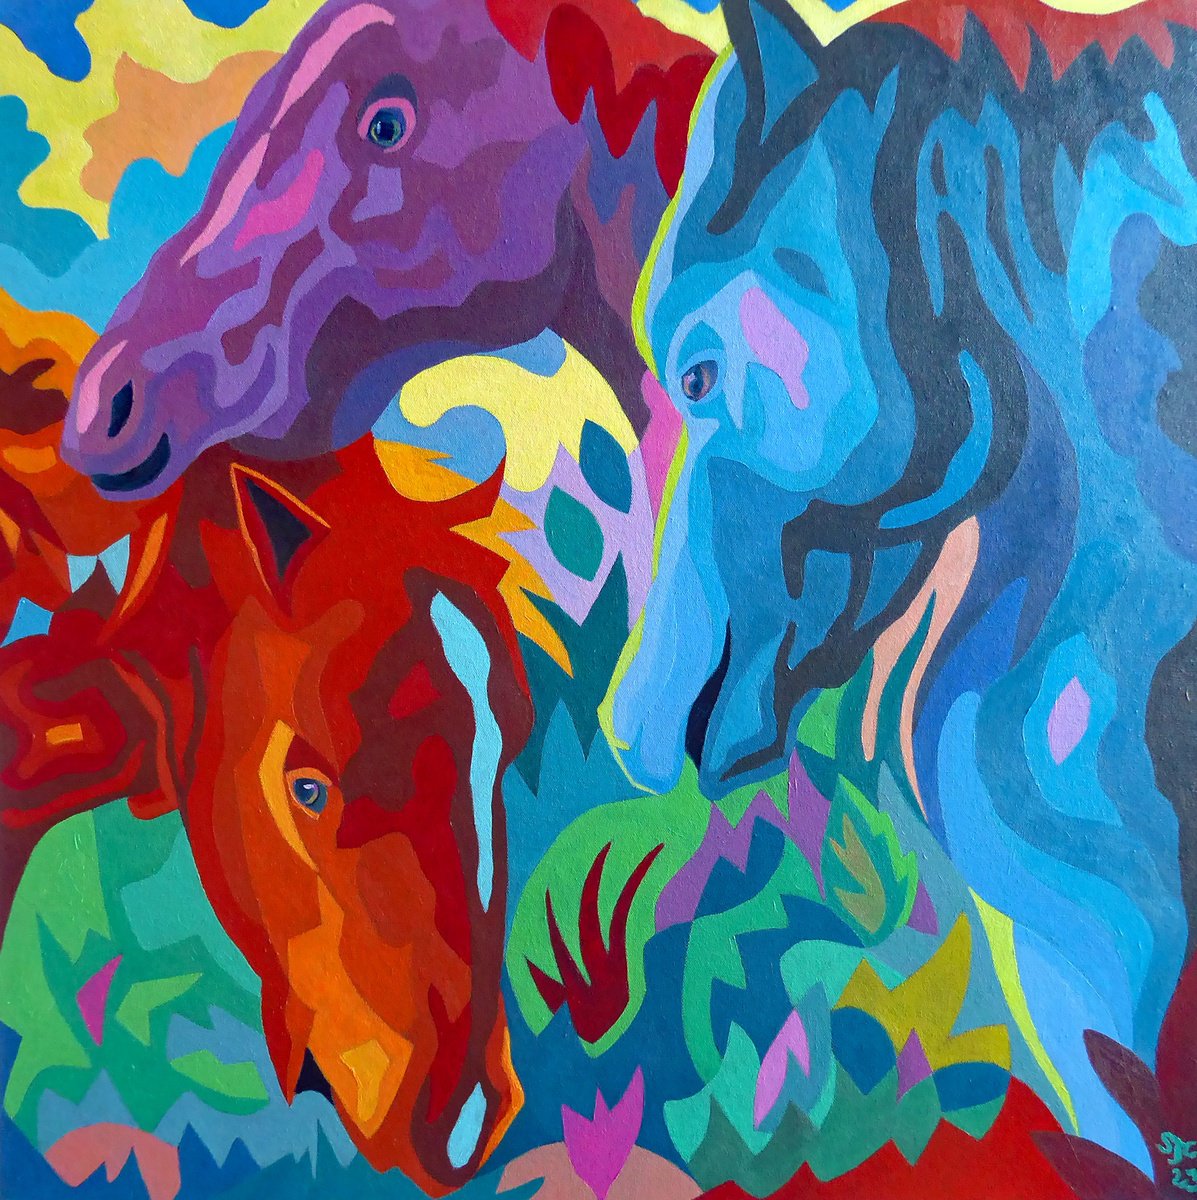 COMPOSITION: THREE HORSES by Stephen Conroy